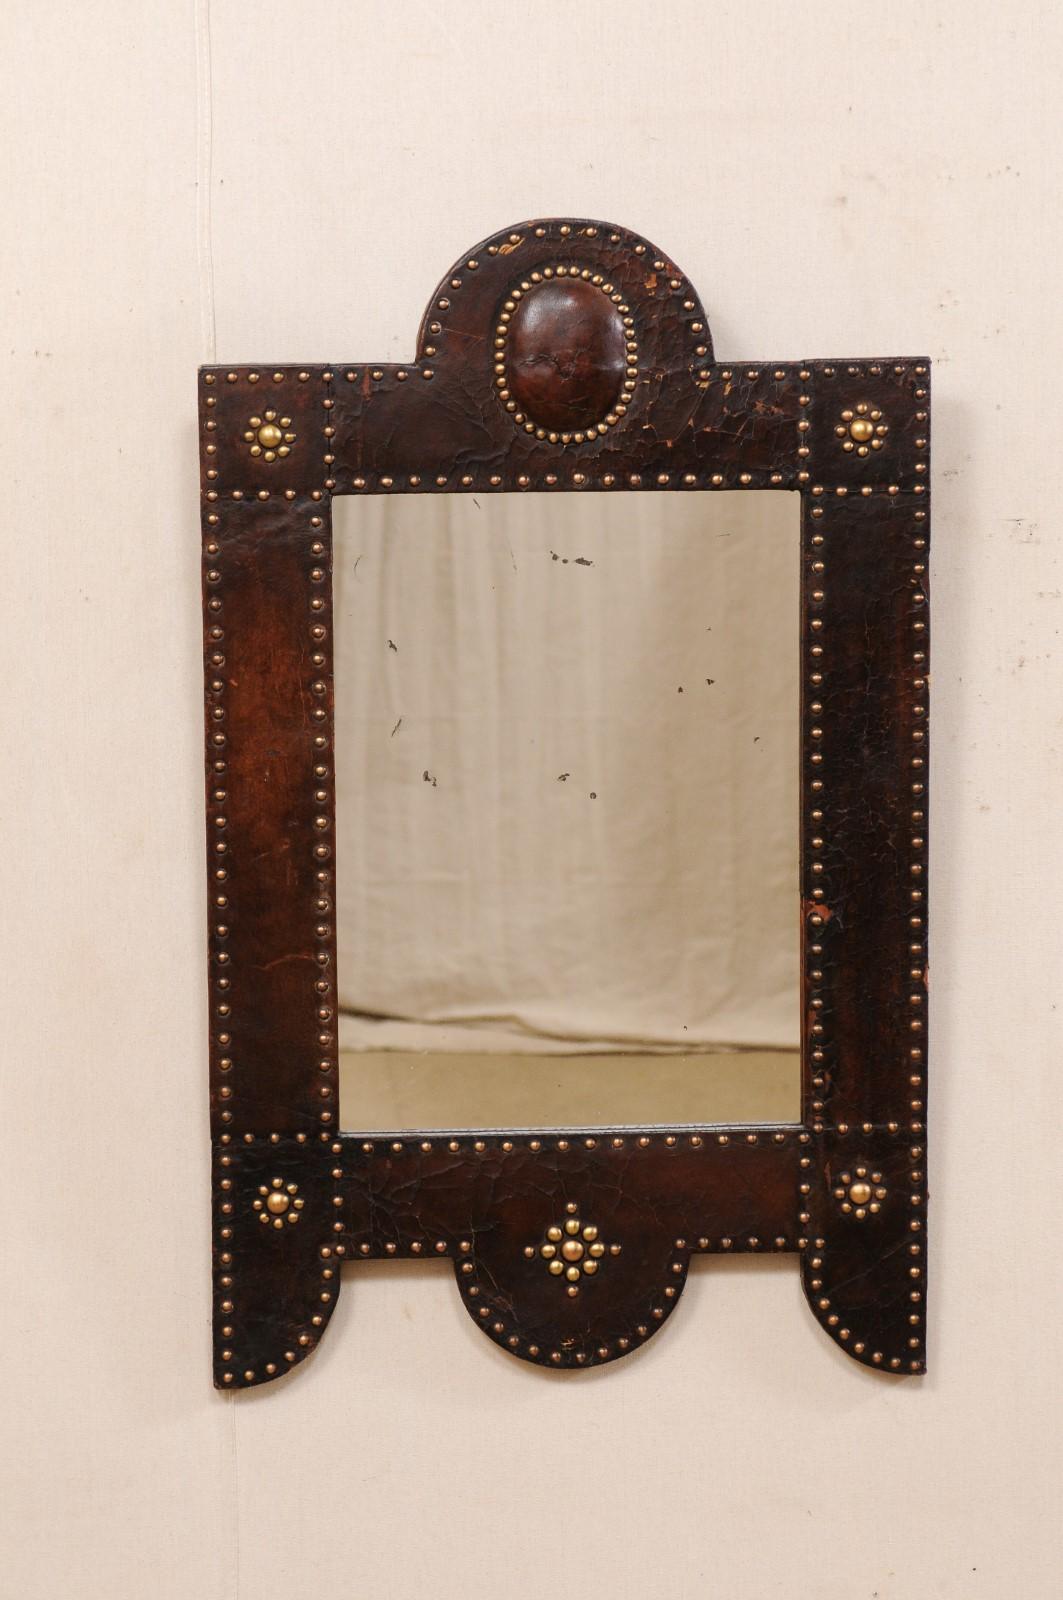 A Spanish leather wrapped mirror with brass nail-head accents from the mid to late 19th century. This antique mirror from Spain has a rectangular-shape with domed/arch at top center, which is repeated at bottom while being flanked by elongated sides